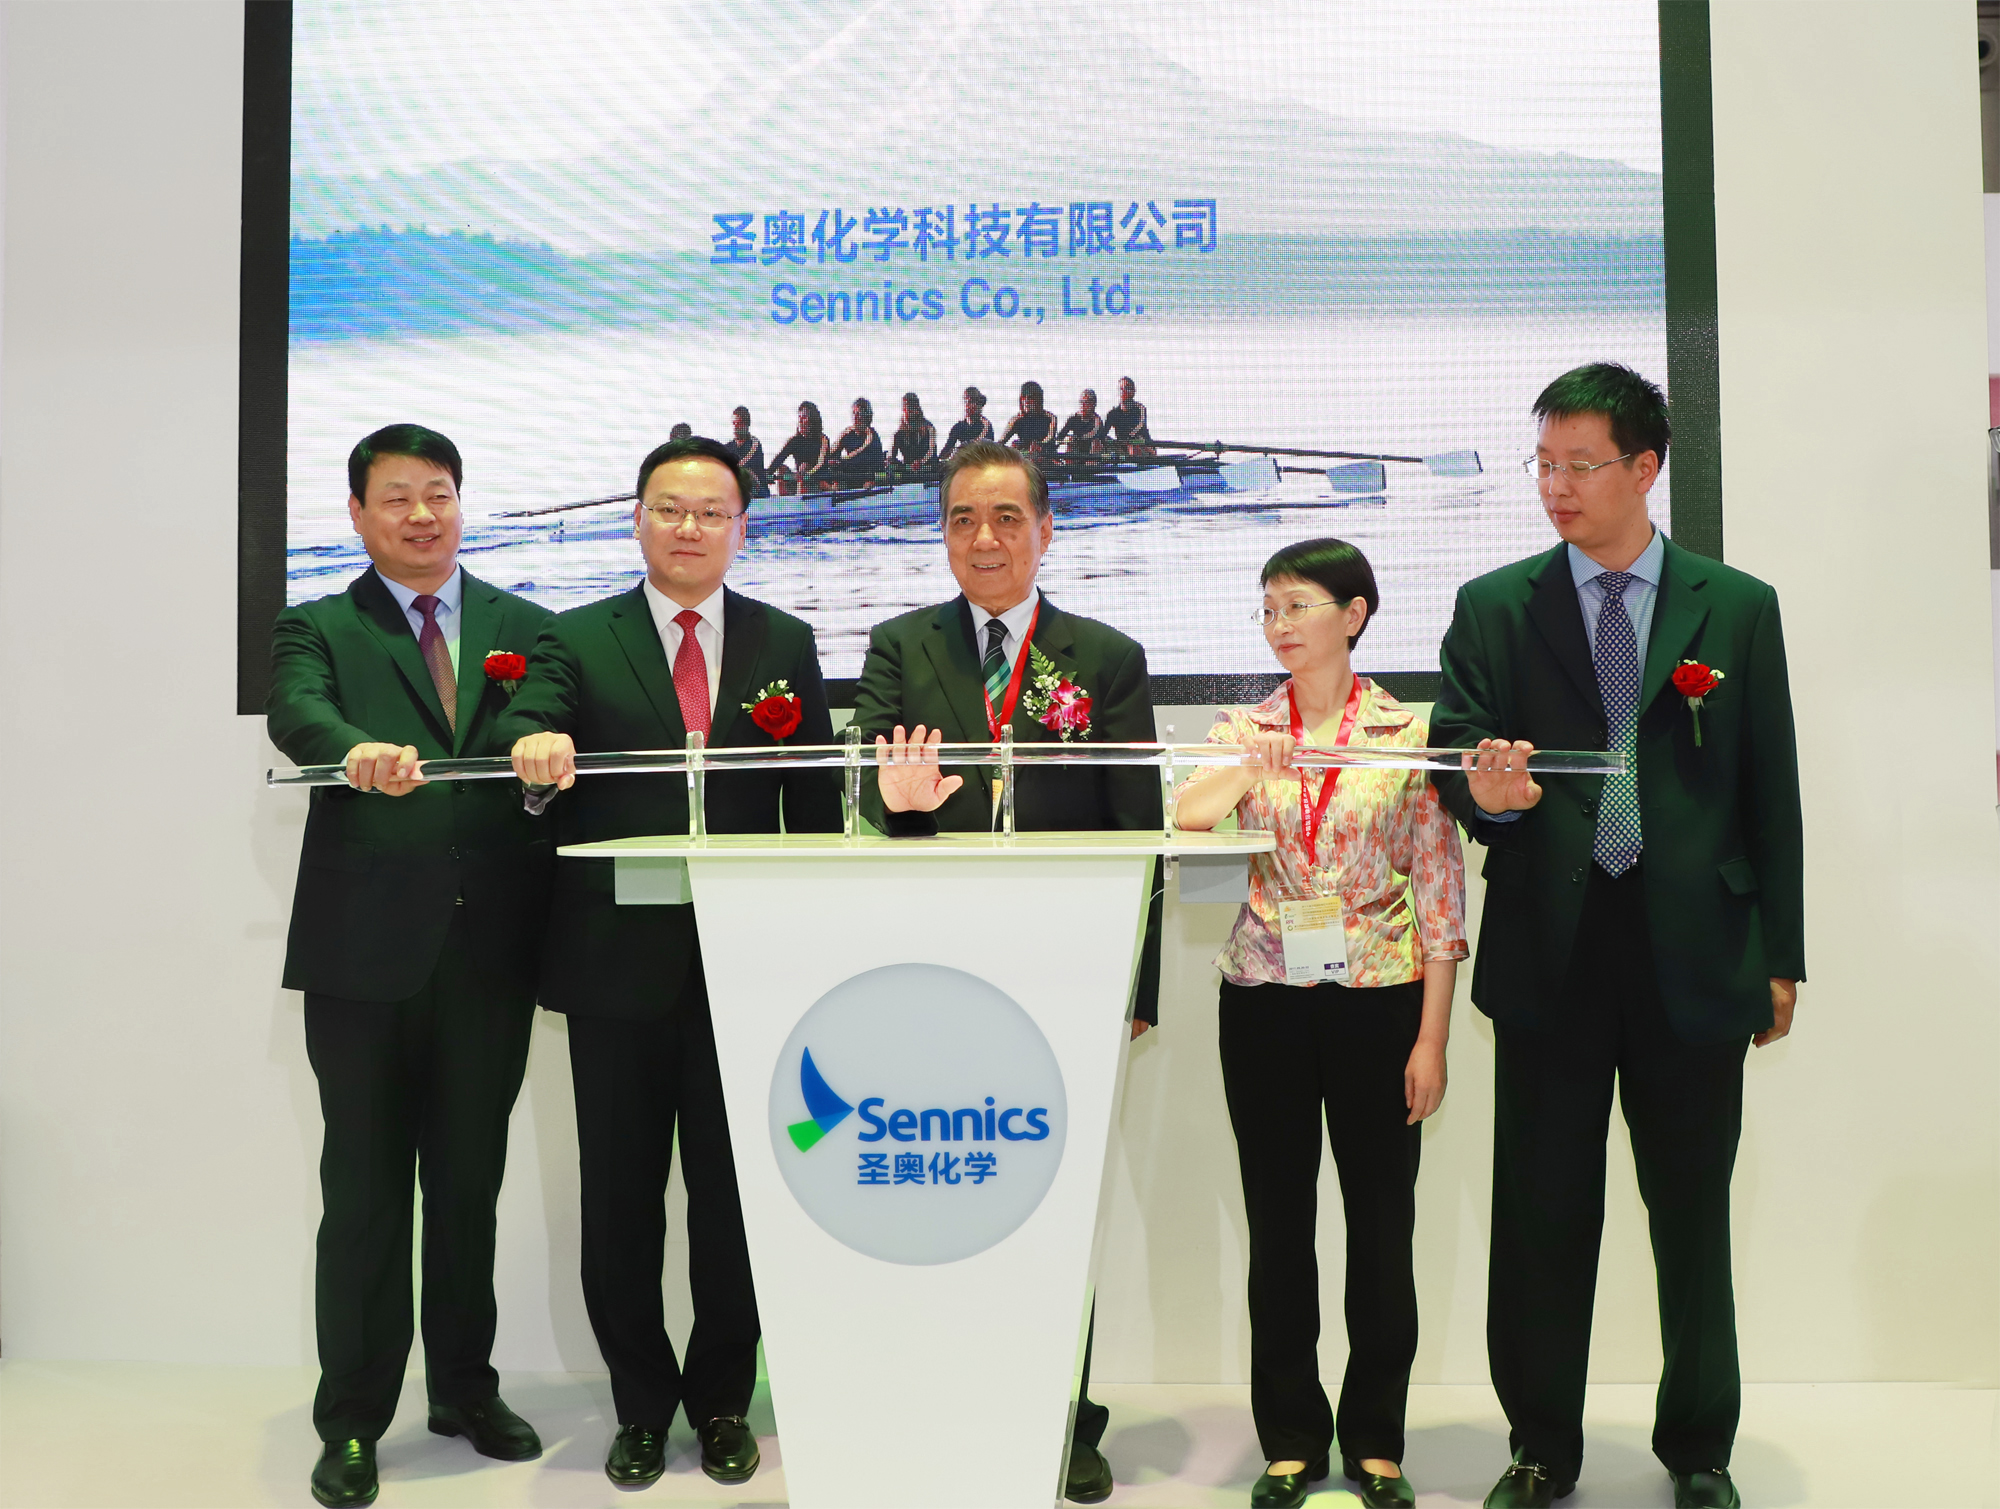 Sennics Attends the 17th International Exhibition on Rubber Technology to Showcase New Brand Image 